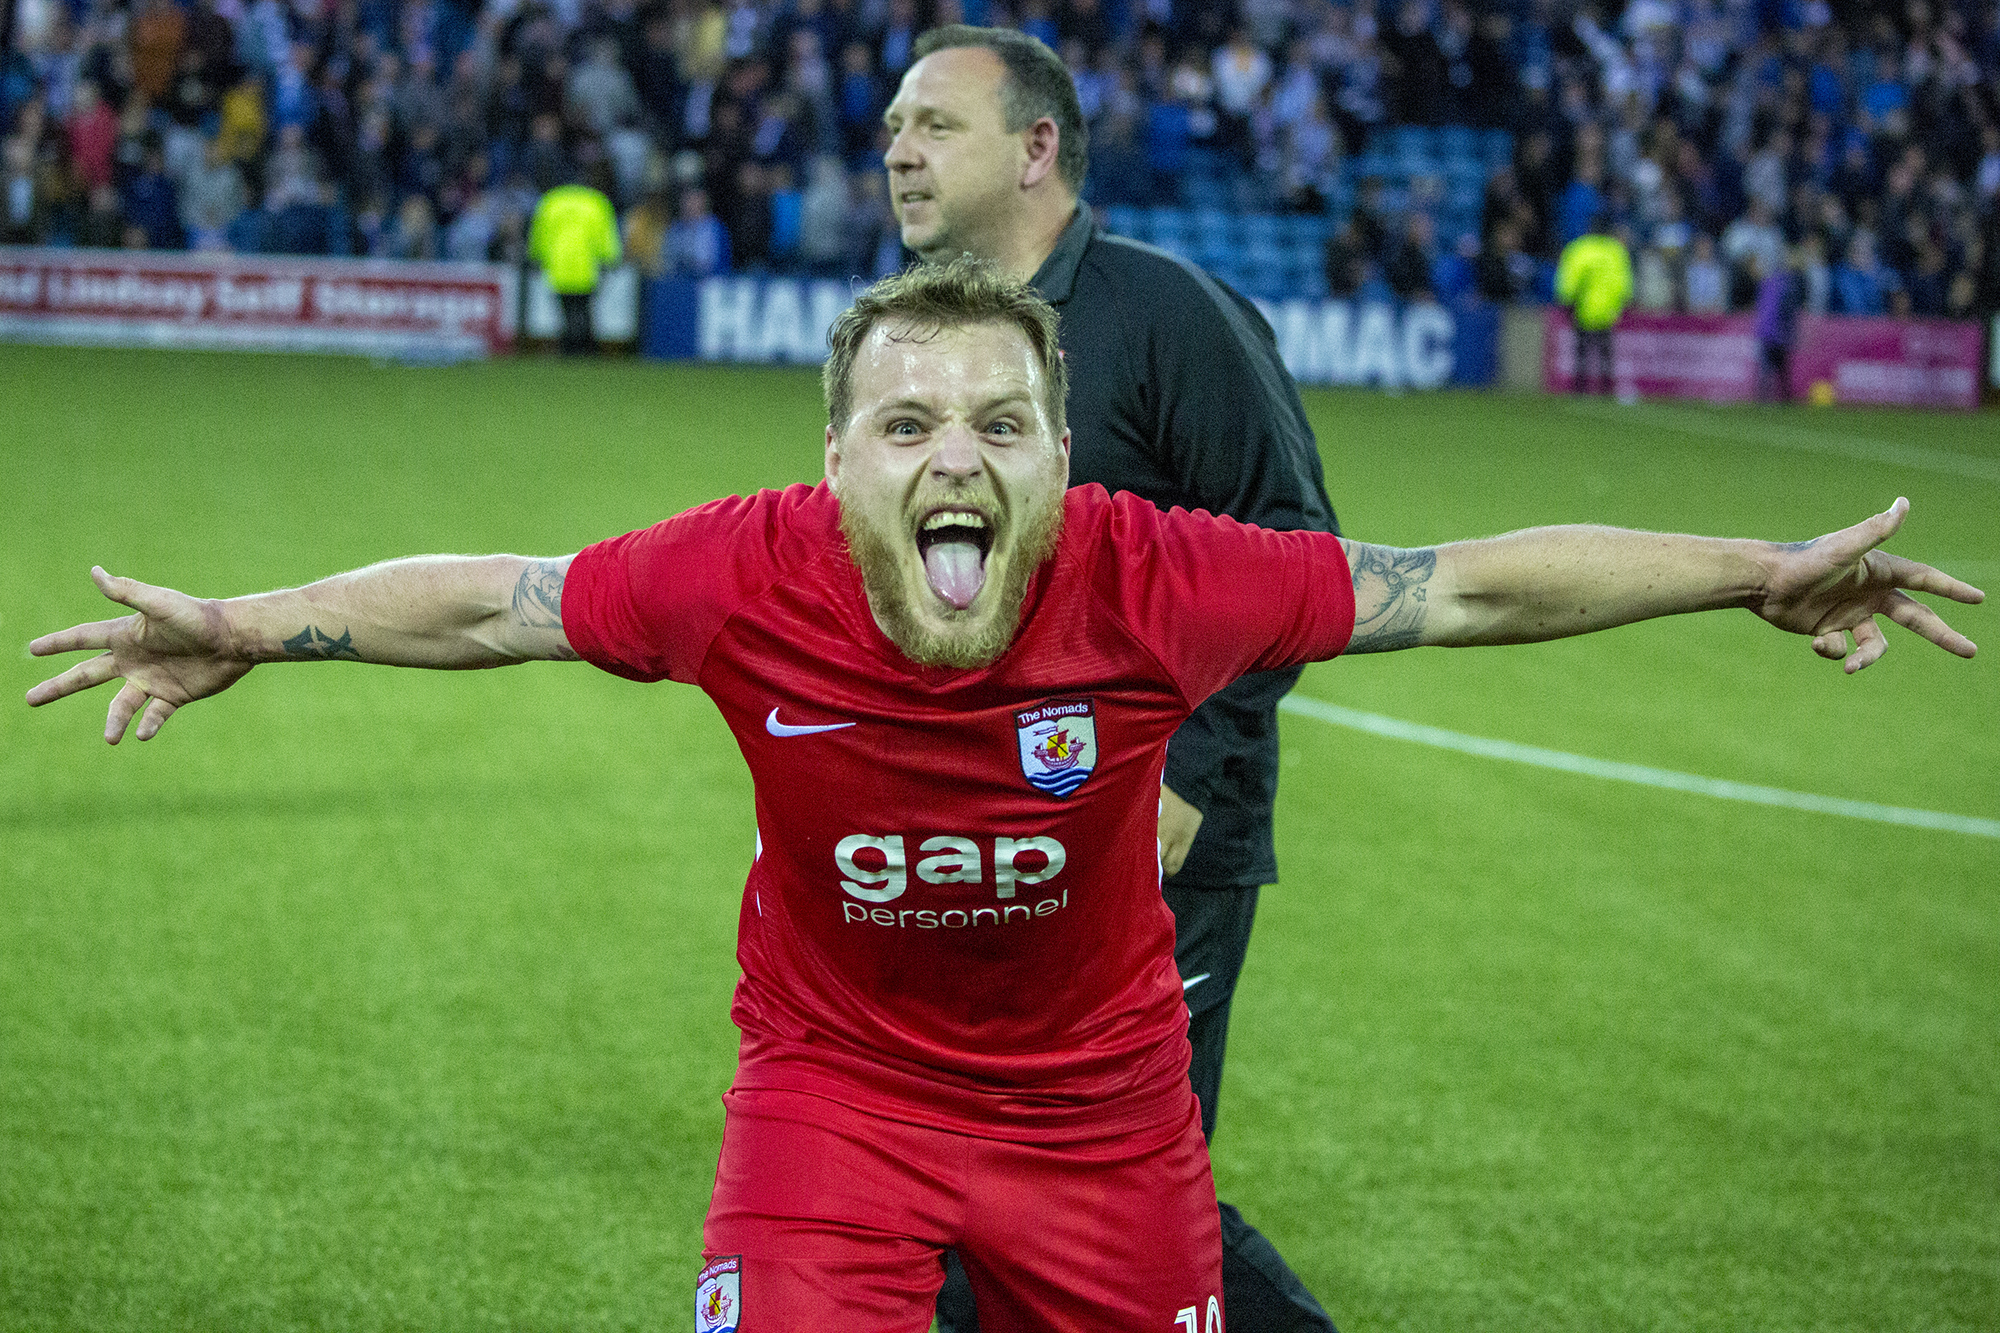 Jamie Insall celebrates Connah's Quay Nomads' victory over Kilmarnock in the Europa League | © NCM Media